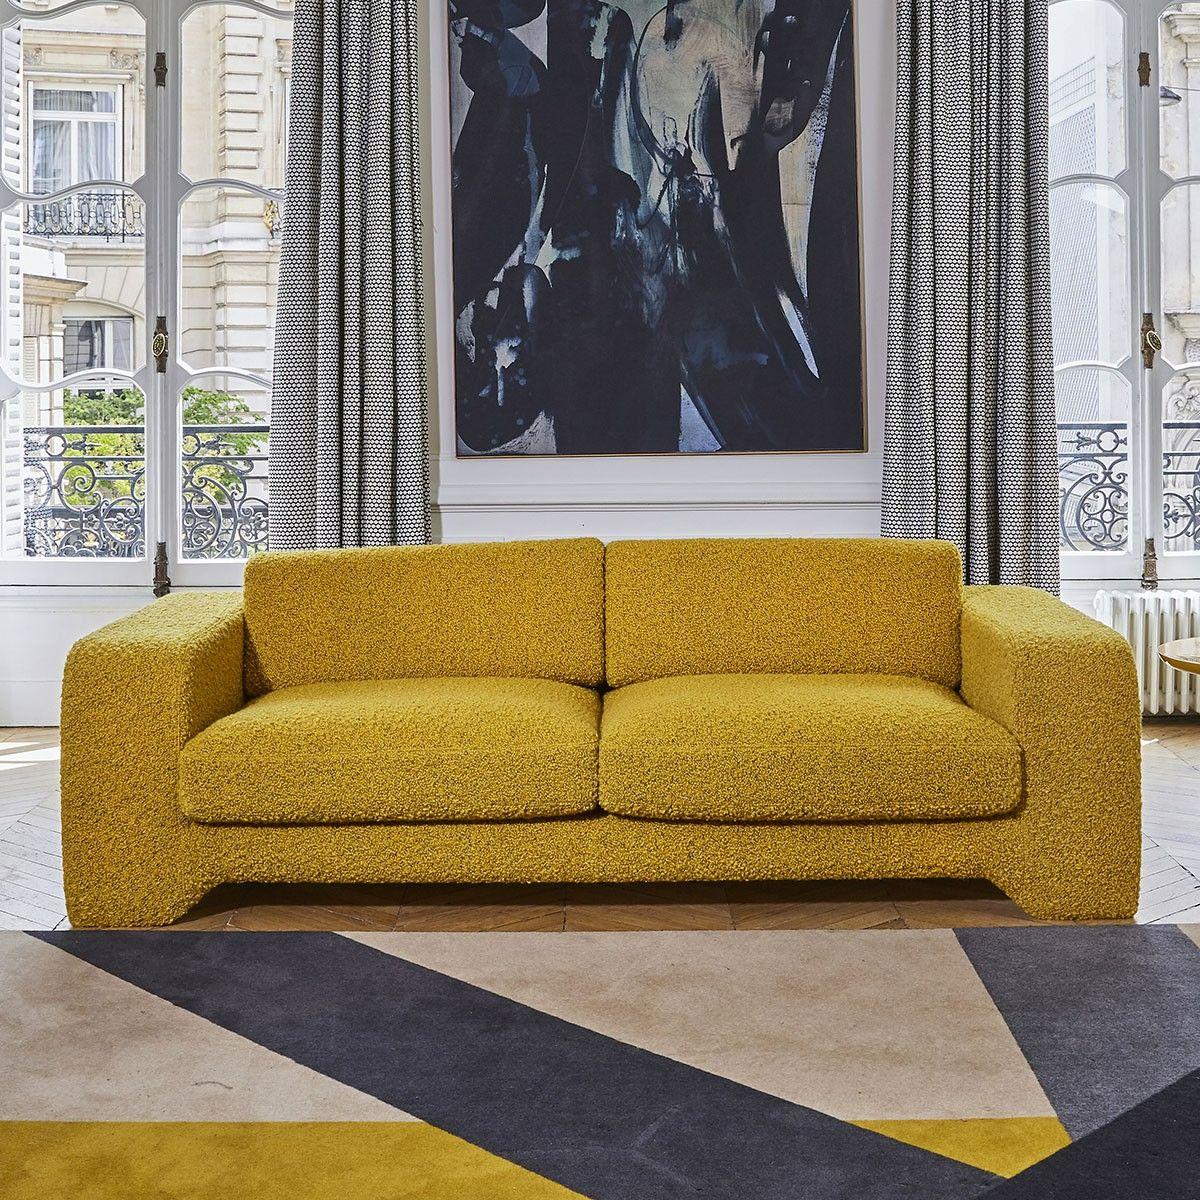 Popus Editions Giovanna 3 Seater Sofa in Yellow Como Velvet Upholstery.

Giovanna is a sofa with a strong profile. A sober, plush line, with this famous detail that changes everything, so as not to forget its strength of character and this